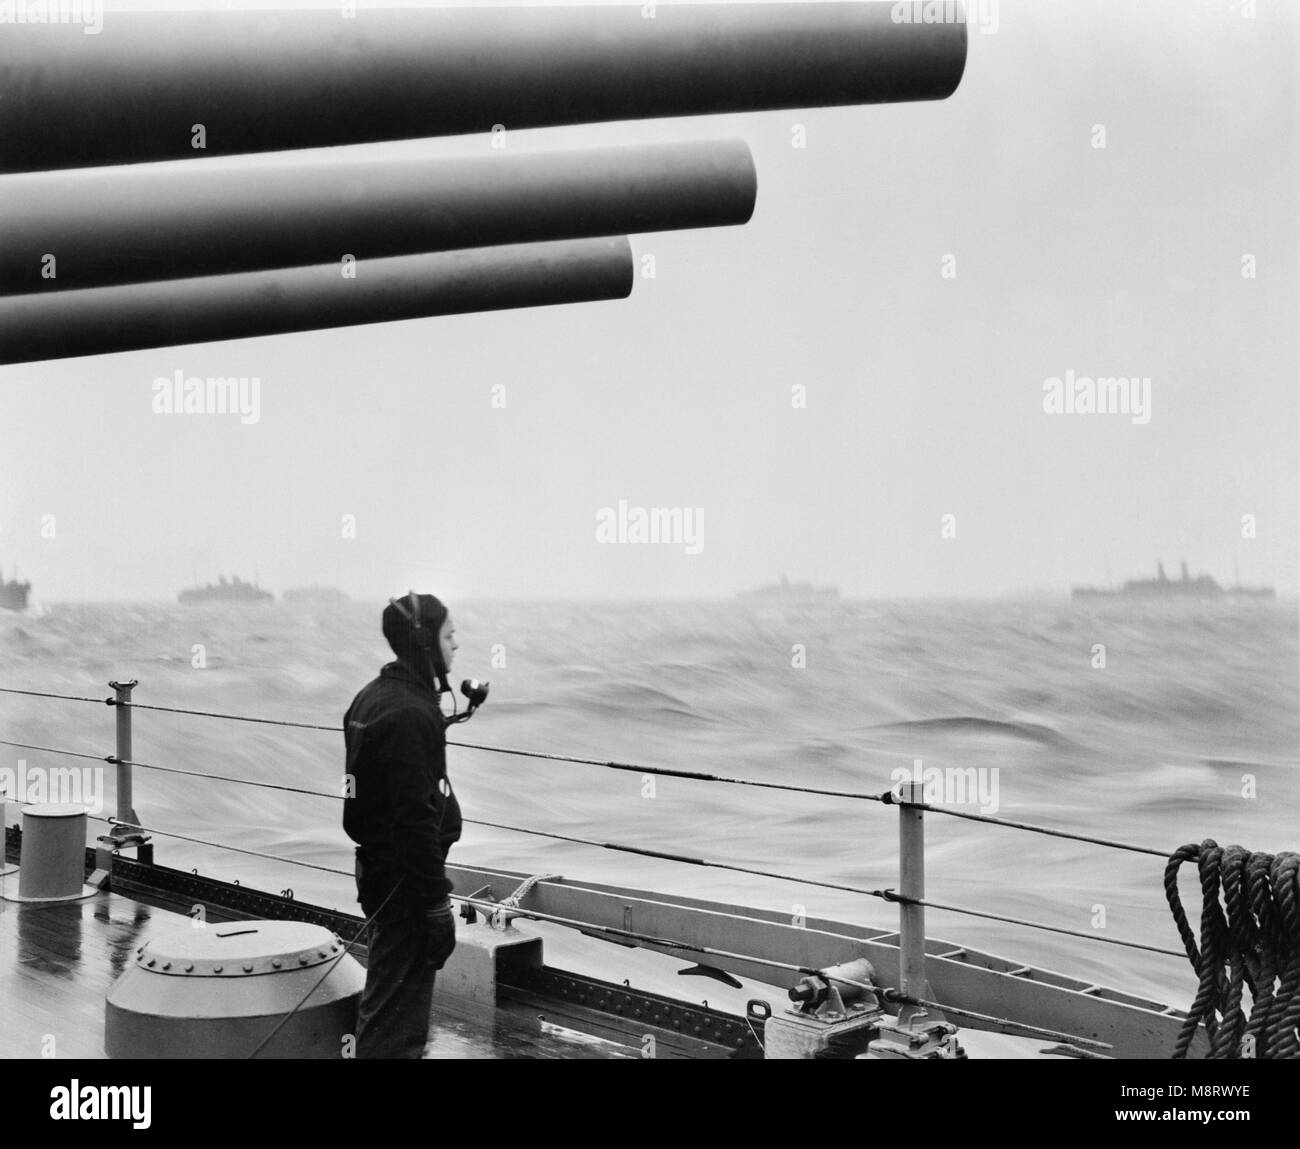 U.S. Navy Sailor on Naval Vessel Keeping Alert Watch over Merchant Ships Delivering Vital Supplies to U.S. and Allied Forces in Europe, Atlantic Ocean, Office of War Information, 1940's Stock Photo